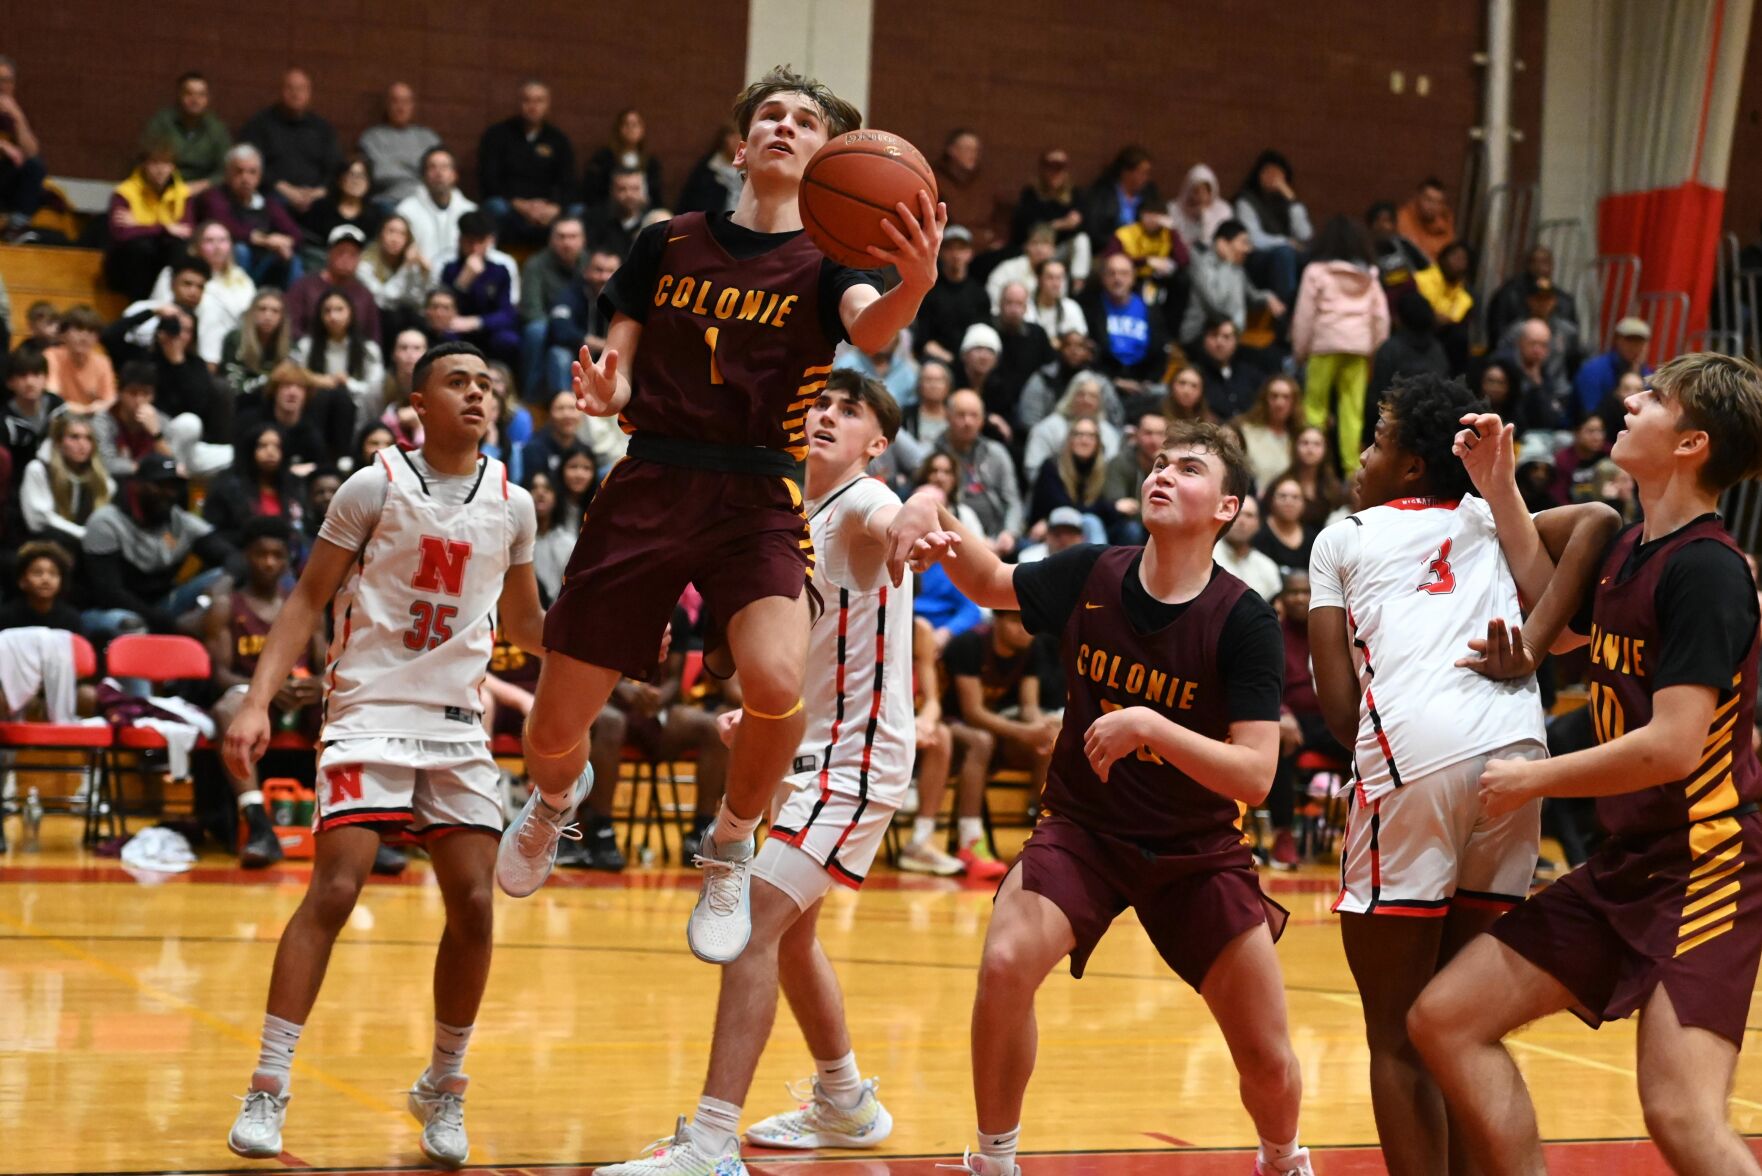 Section 2 boys’ basketball: Colonie surges to 72-55 win over Niskayuna in battle of unbeatens